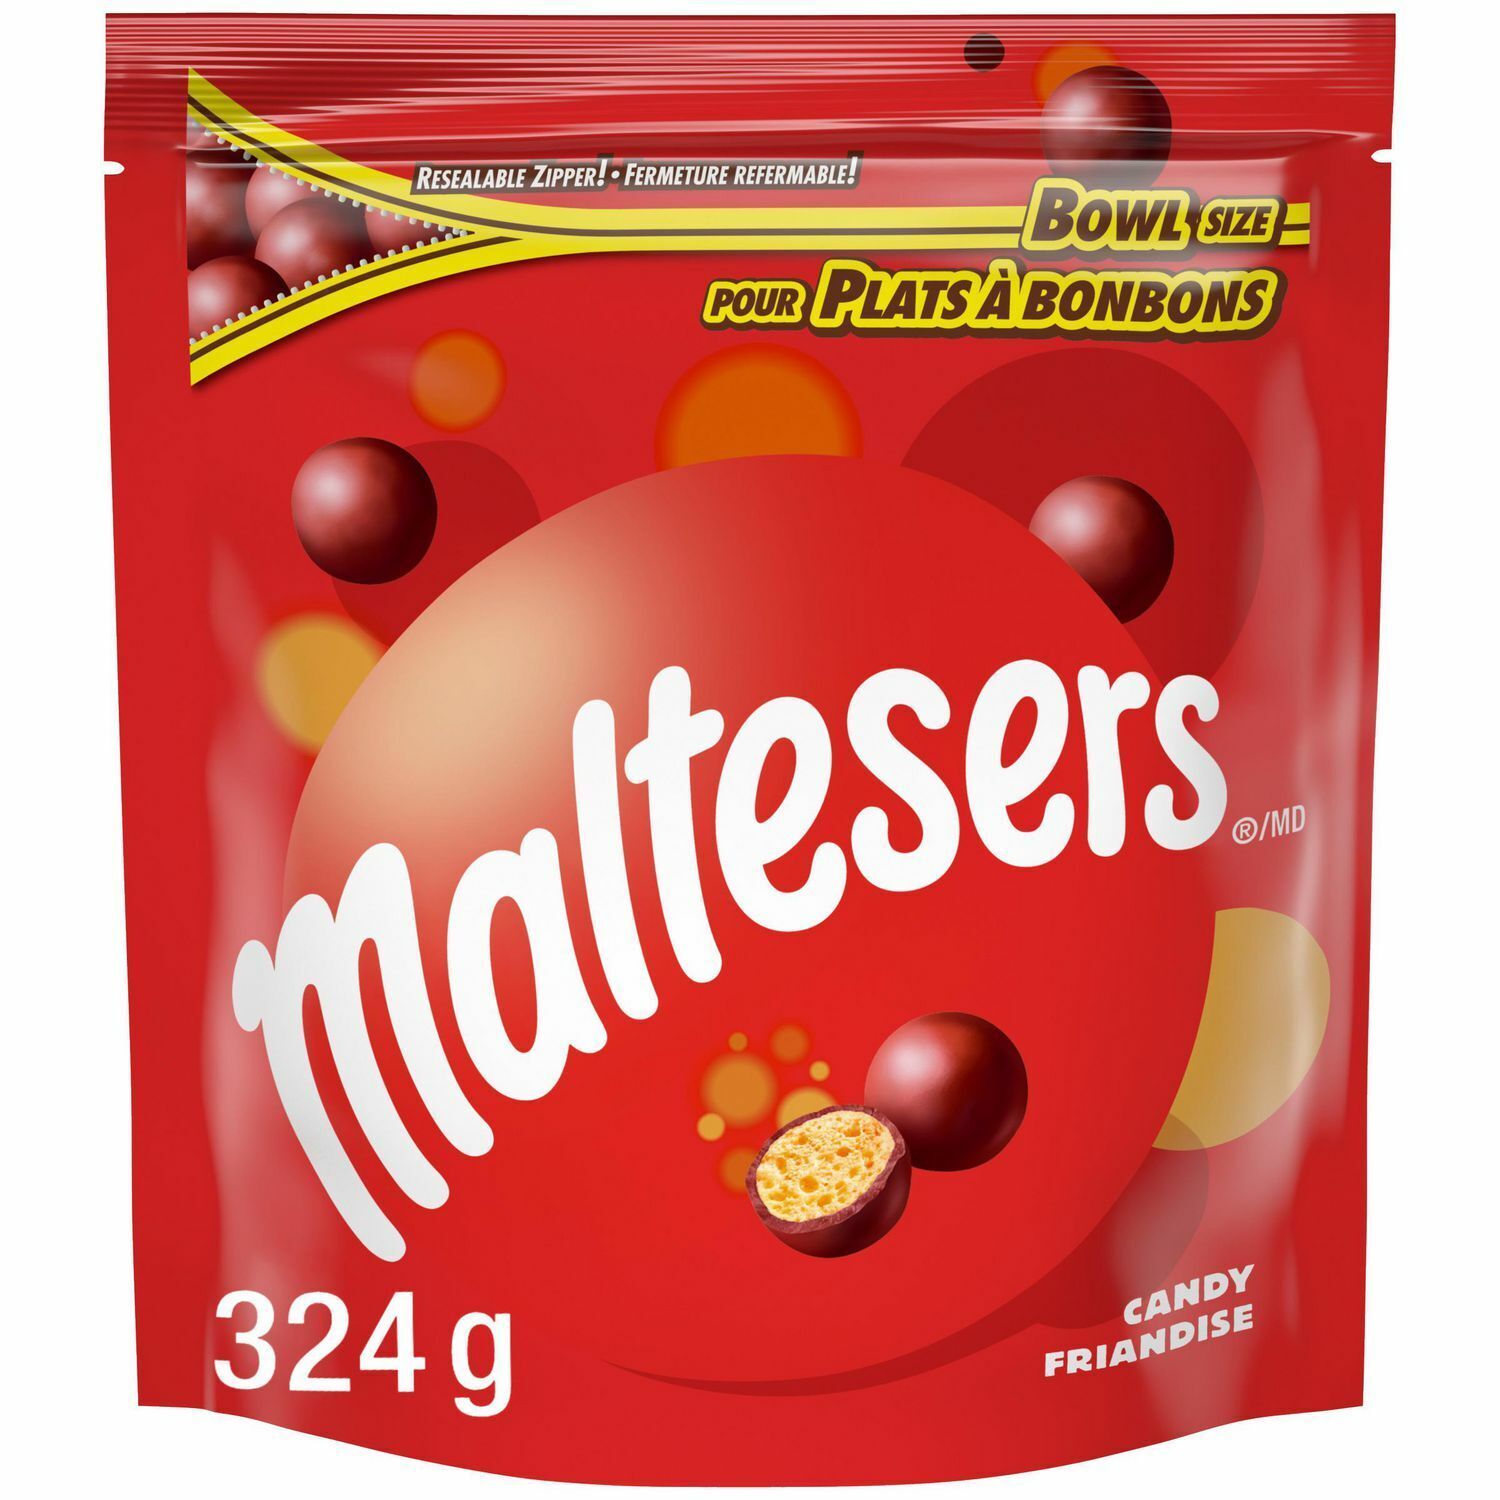 2 Bags of Maltesers Chocolate Candy Pieces, Bowl Size, 324g each, Free Shipping - $34.83